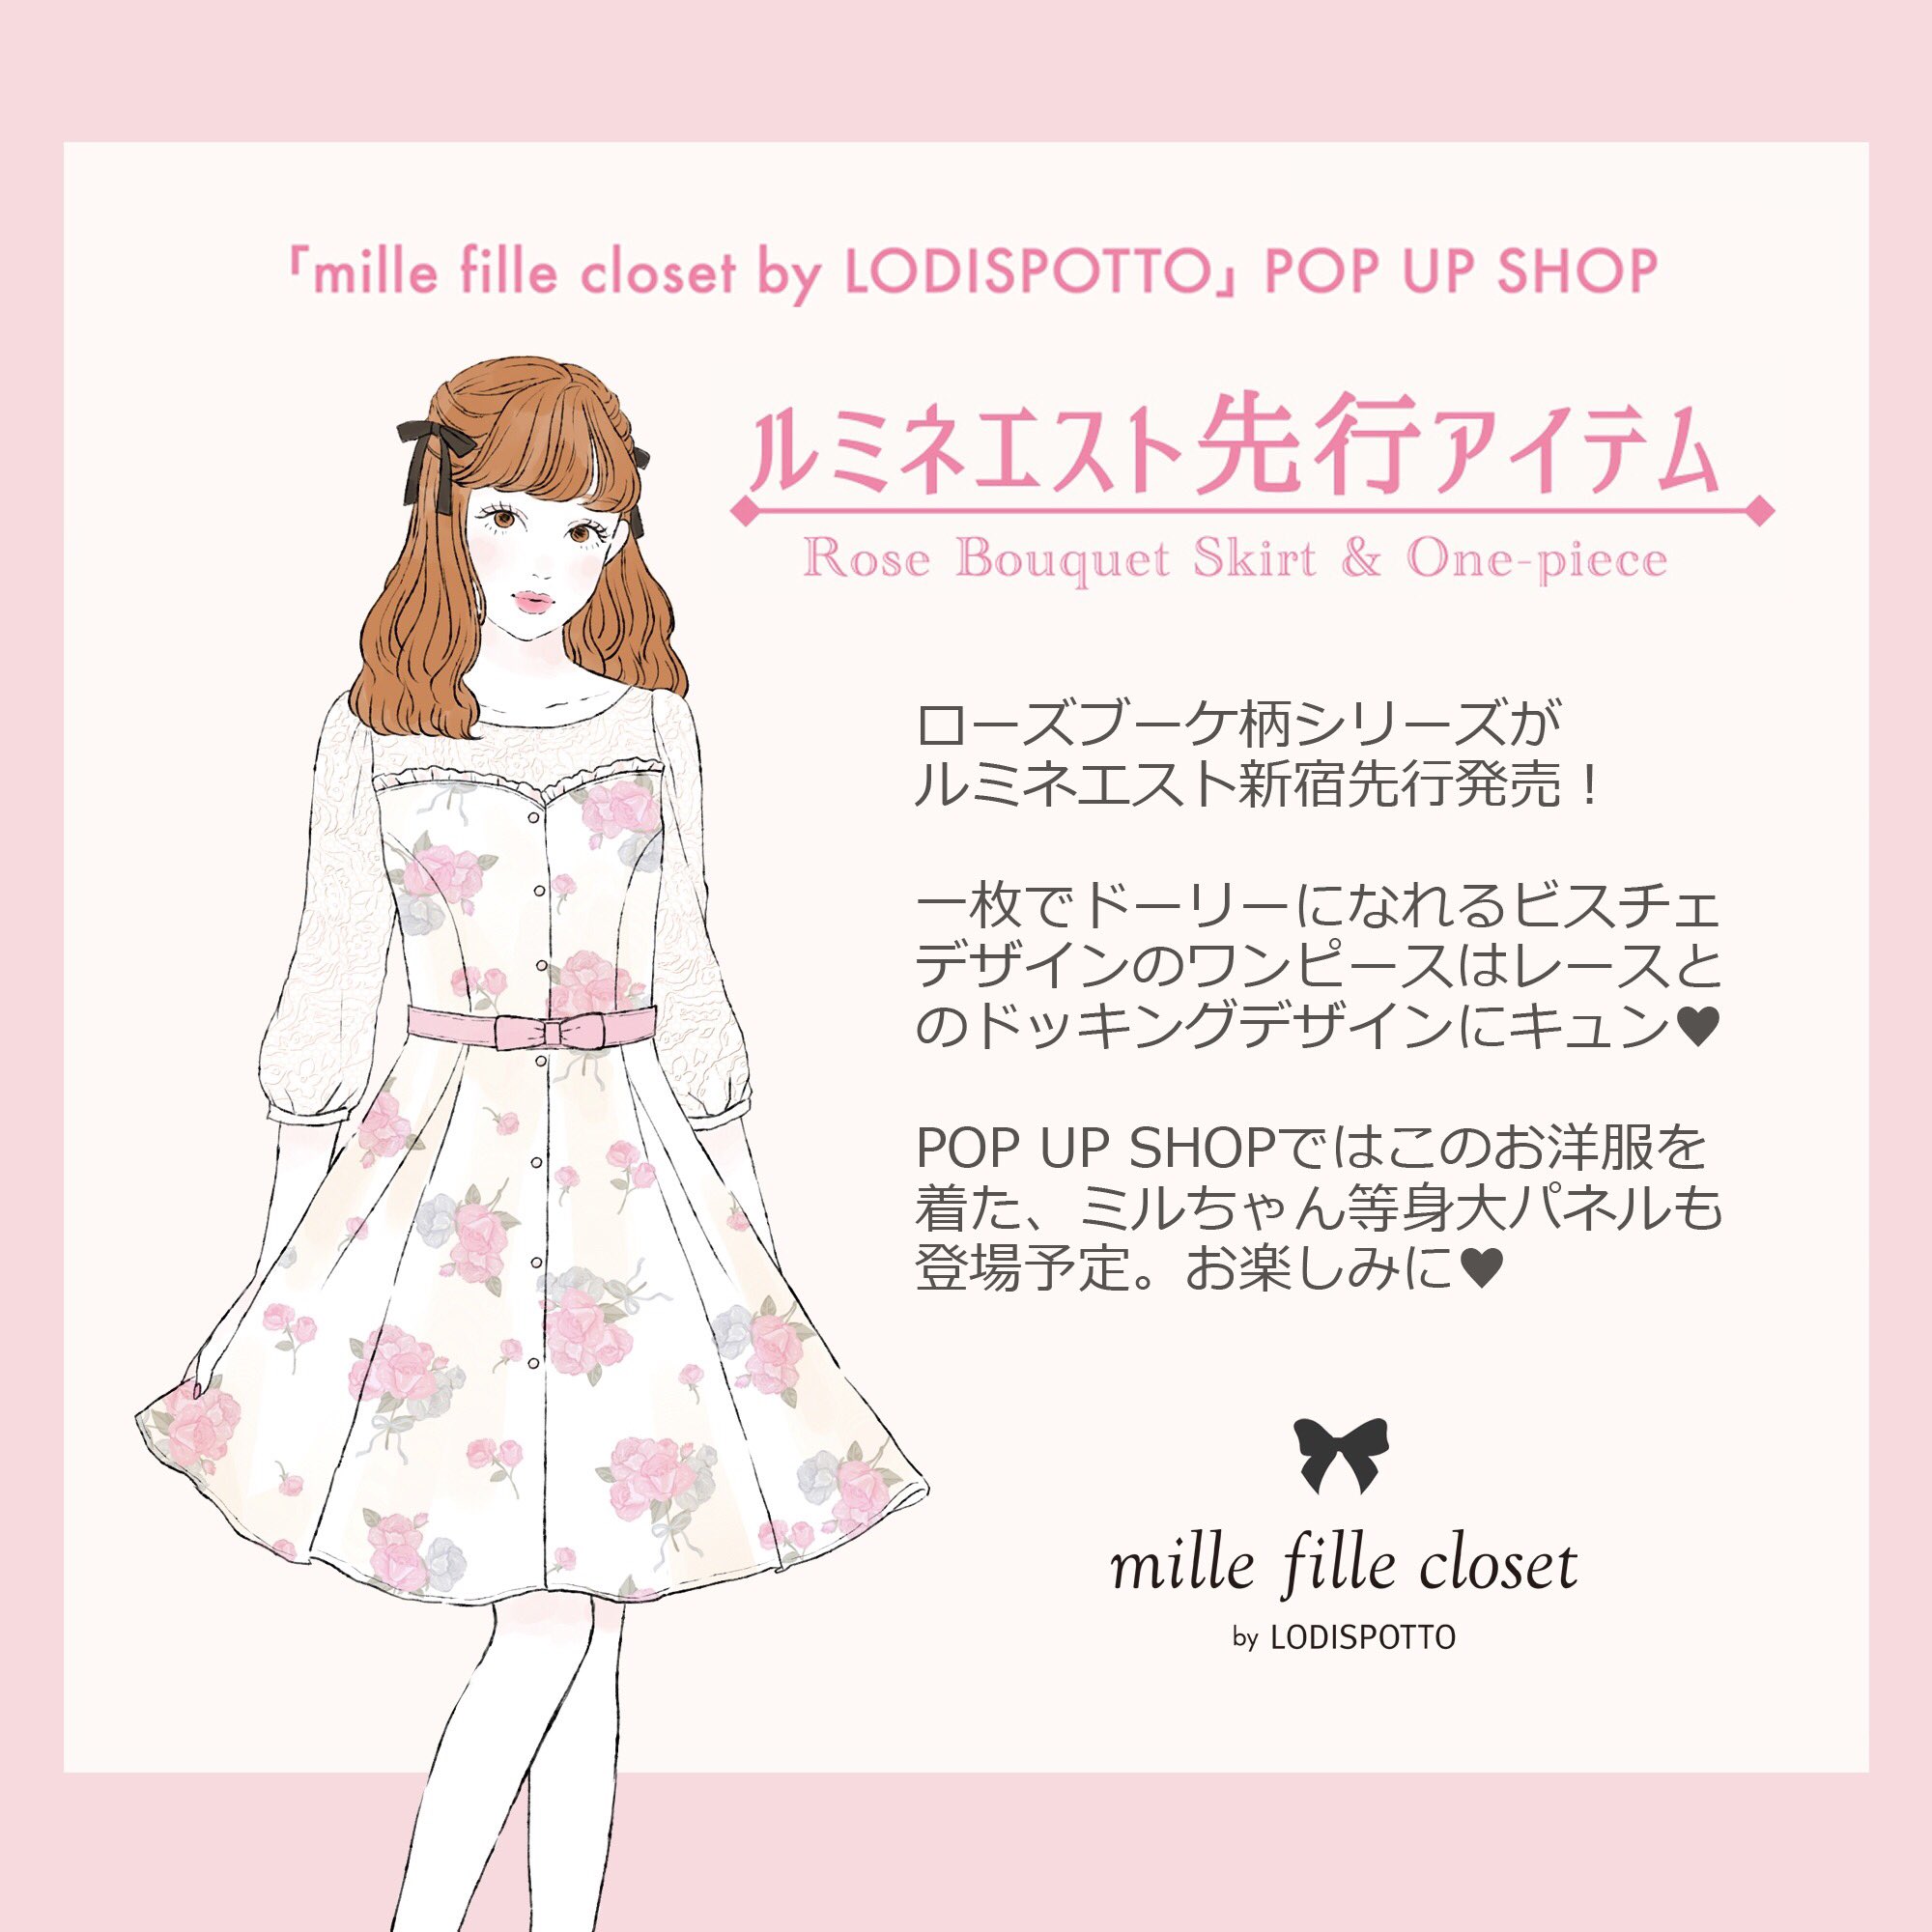 mille fille closet by LODISPOTTO［ミルフィーユクローゼット］ on 